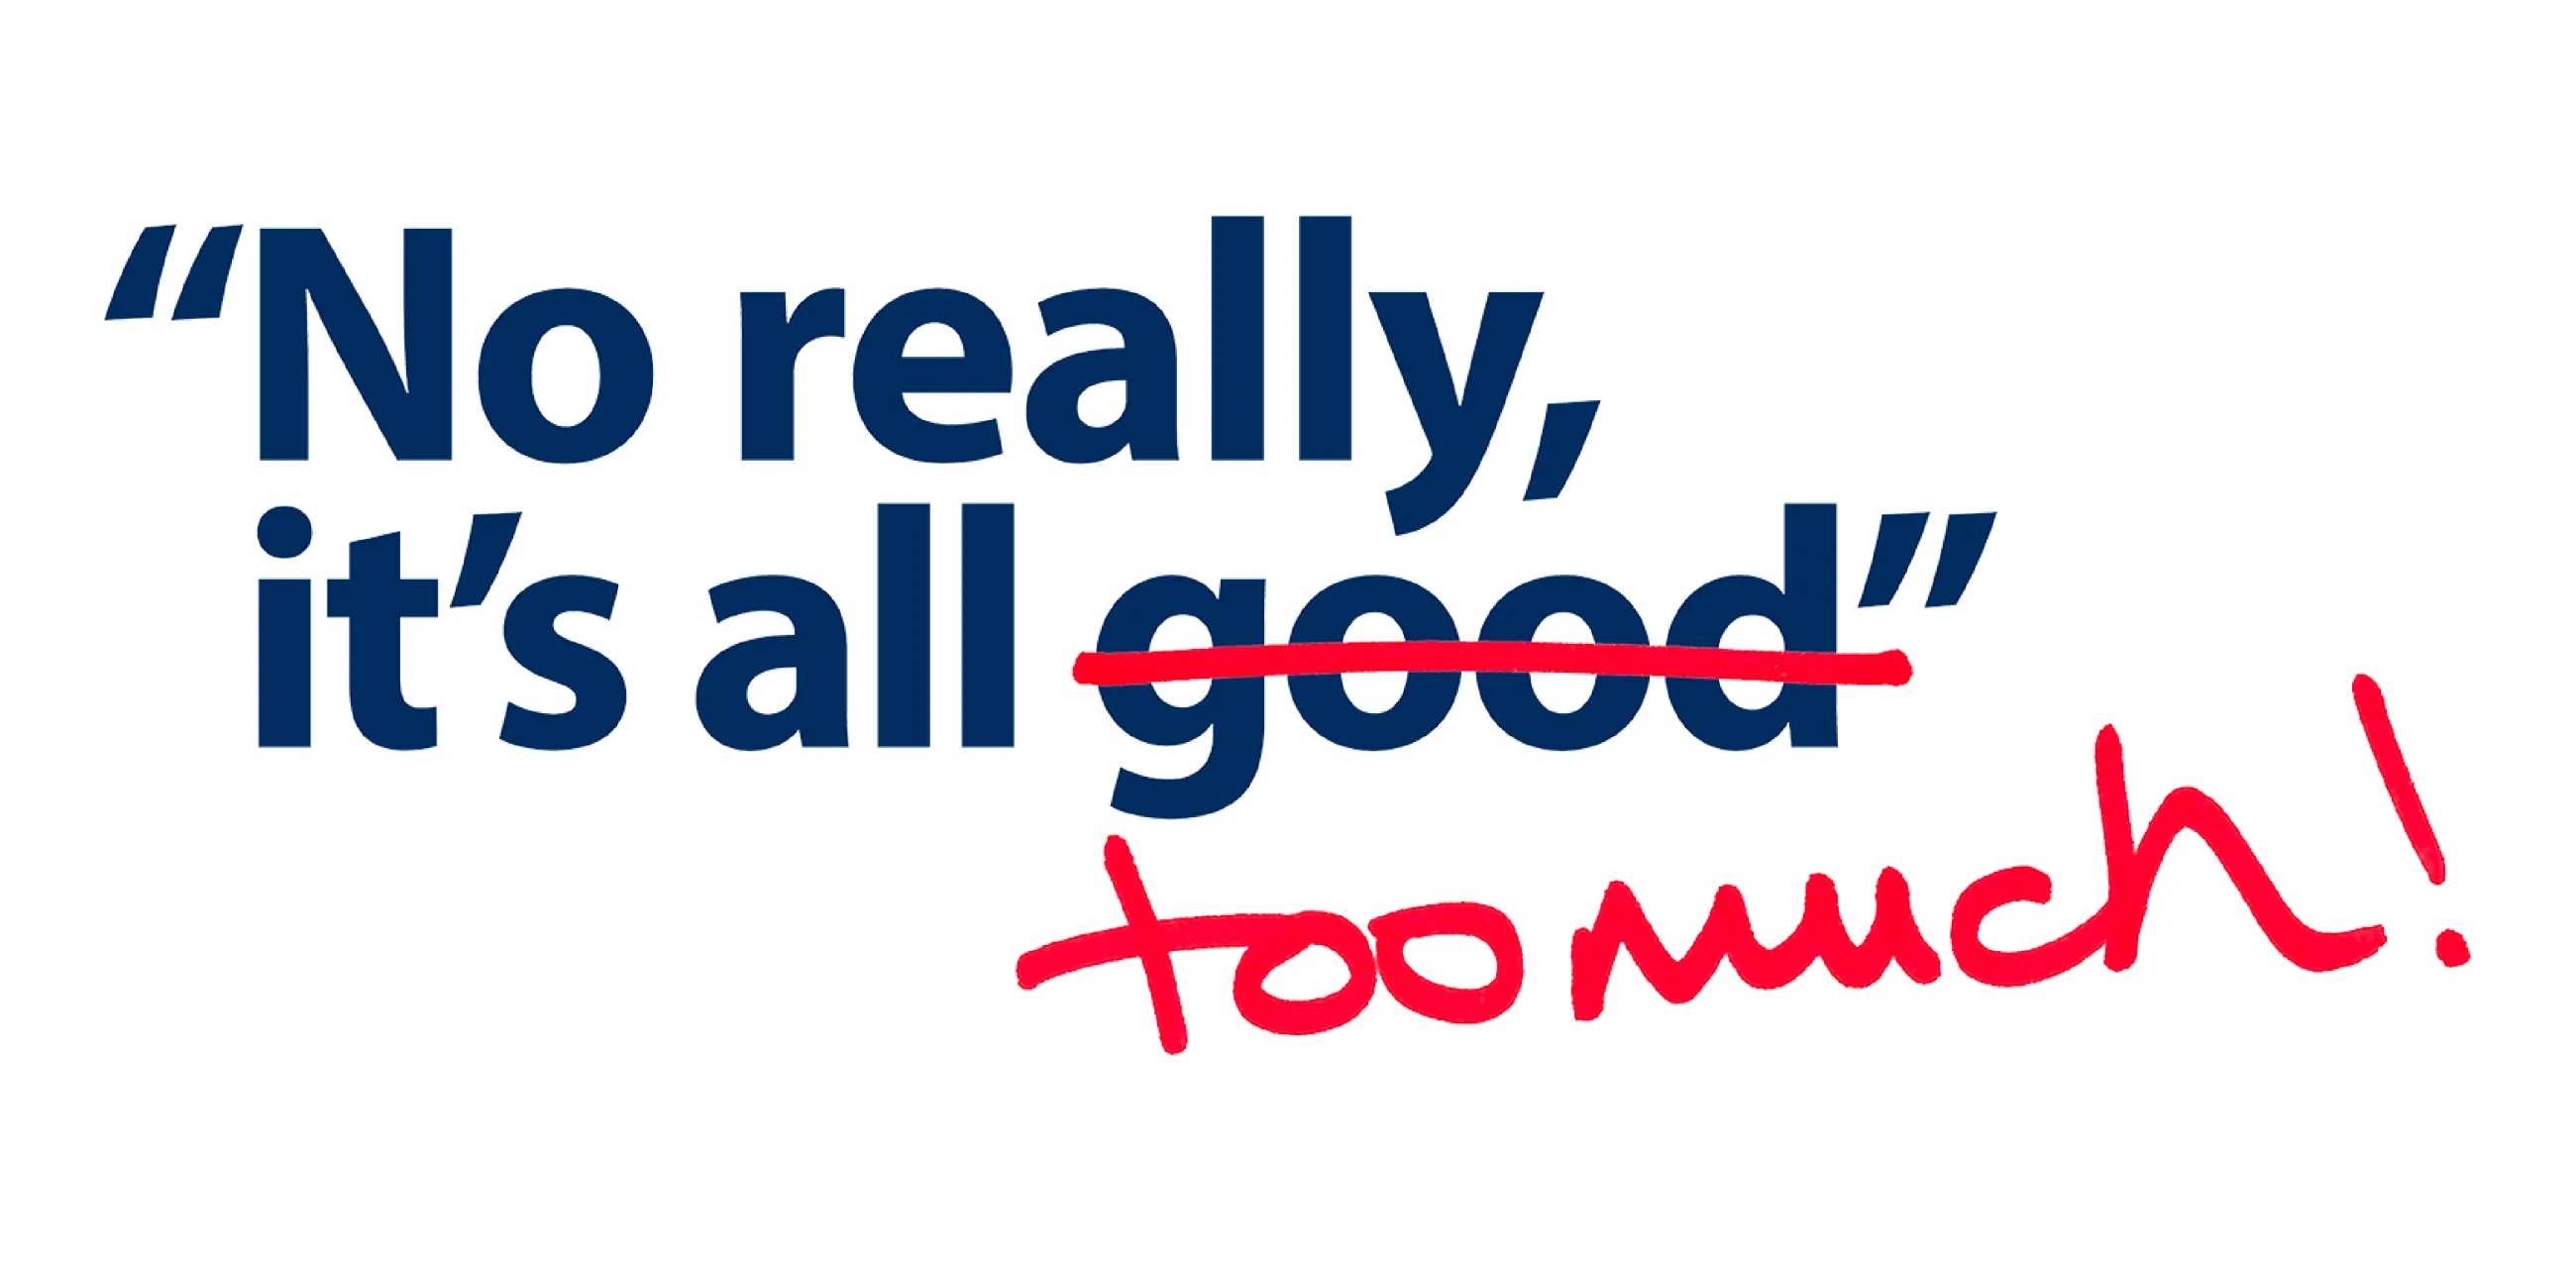 "No really, it's all good" - good is crossed out and replaced with "too much"